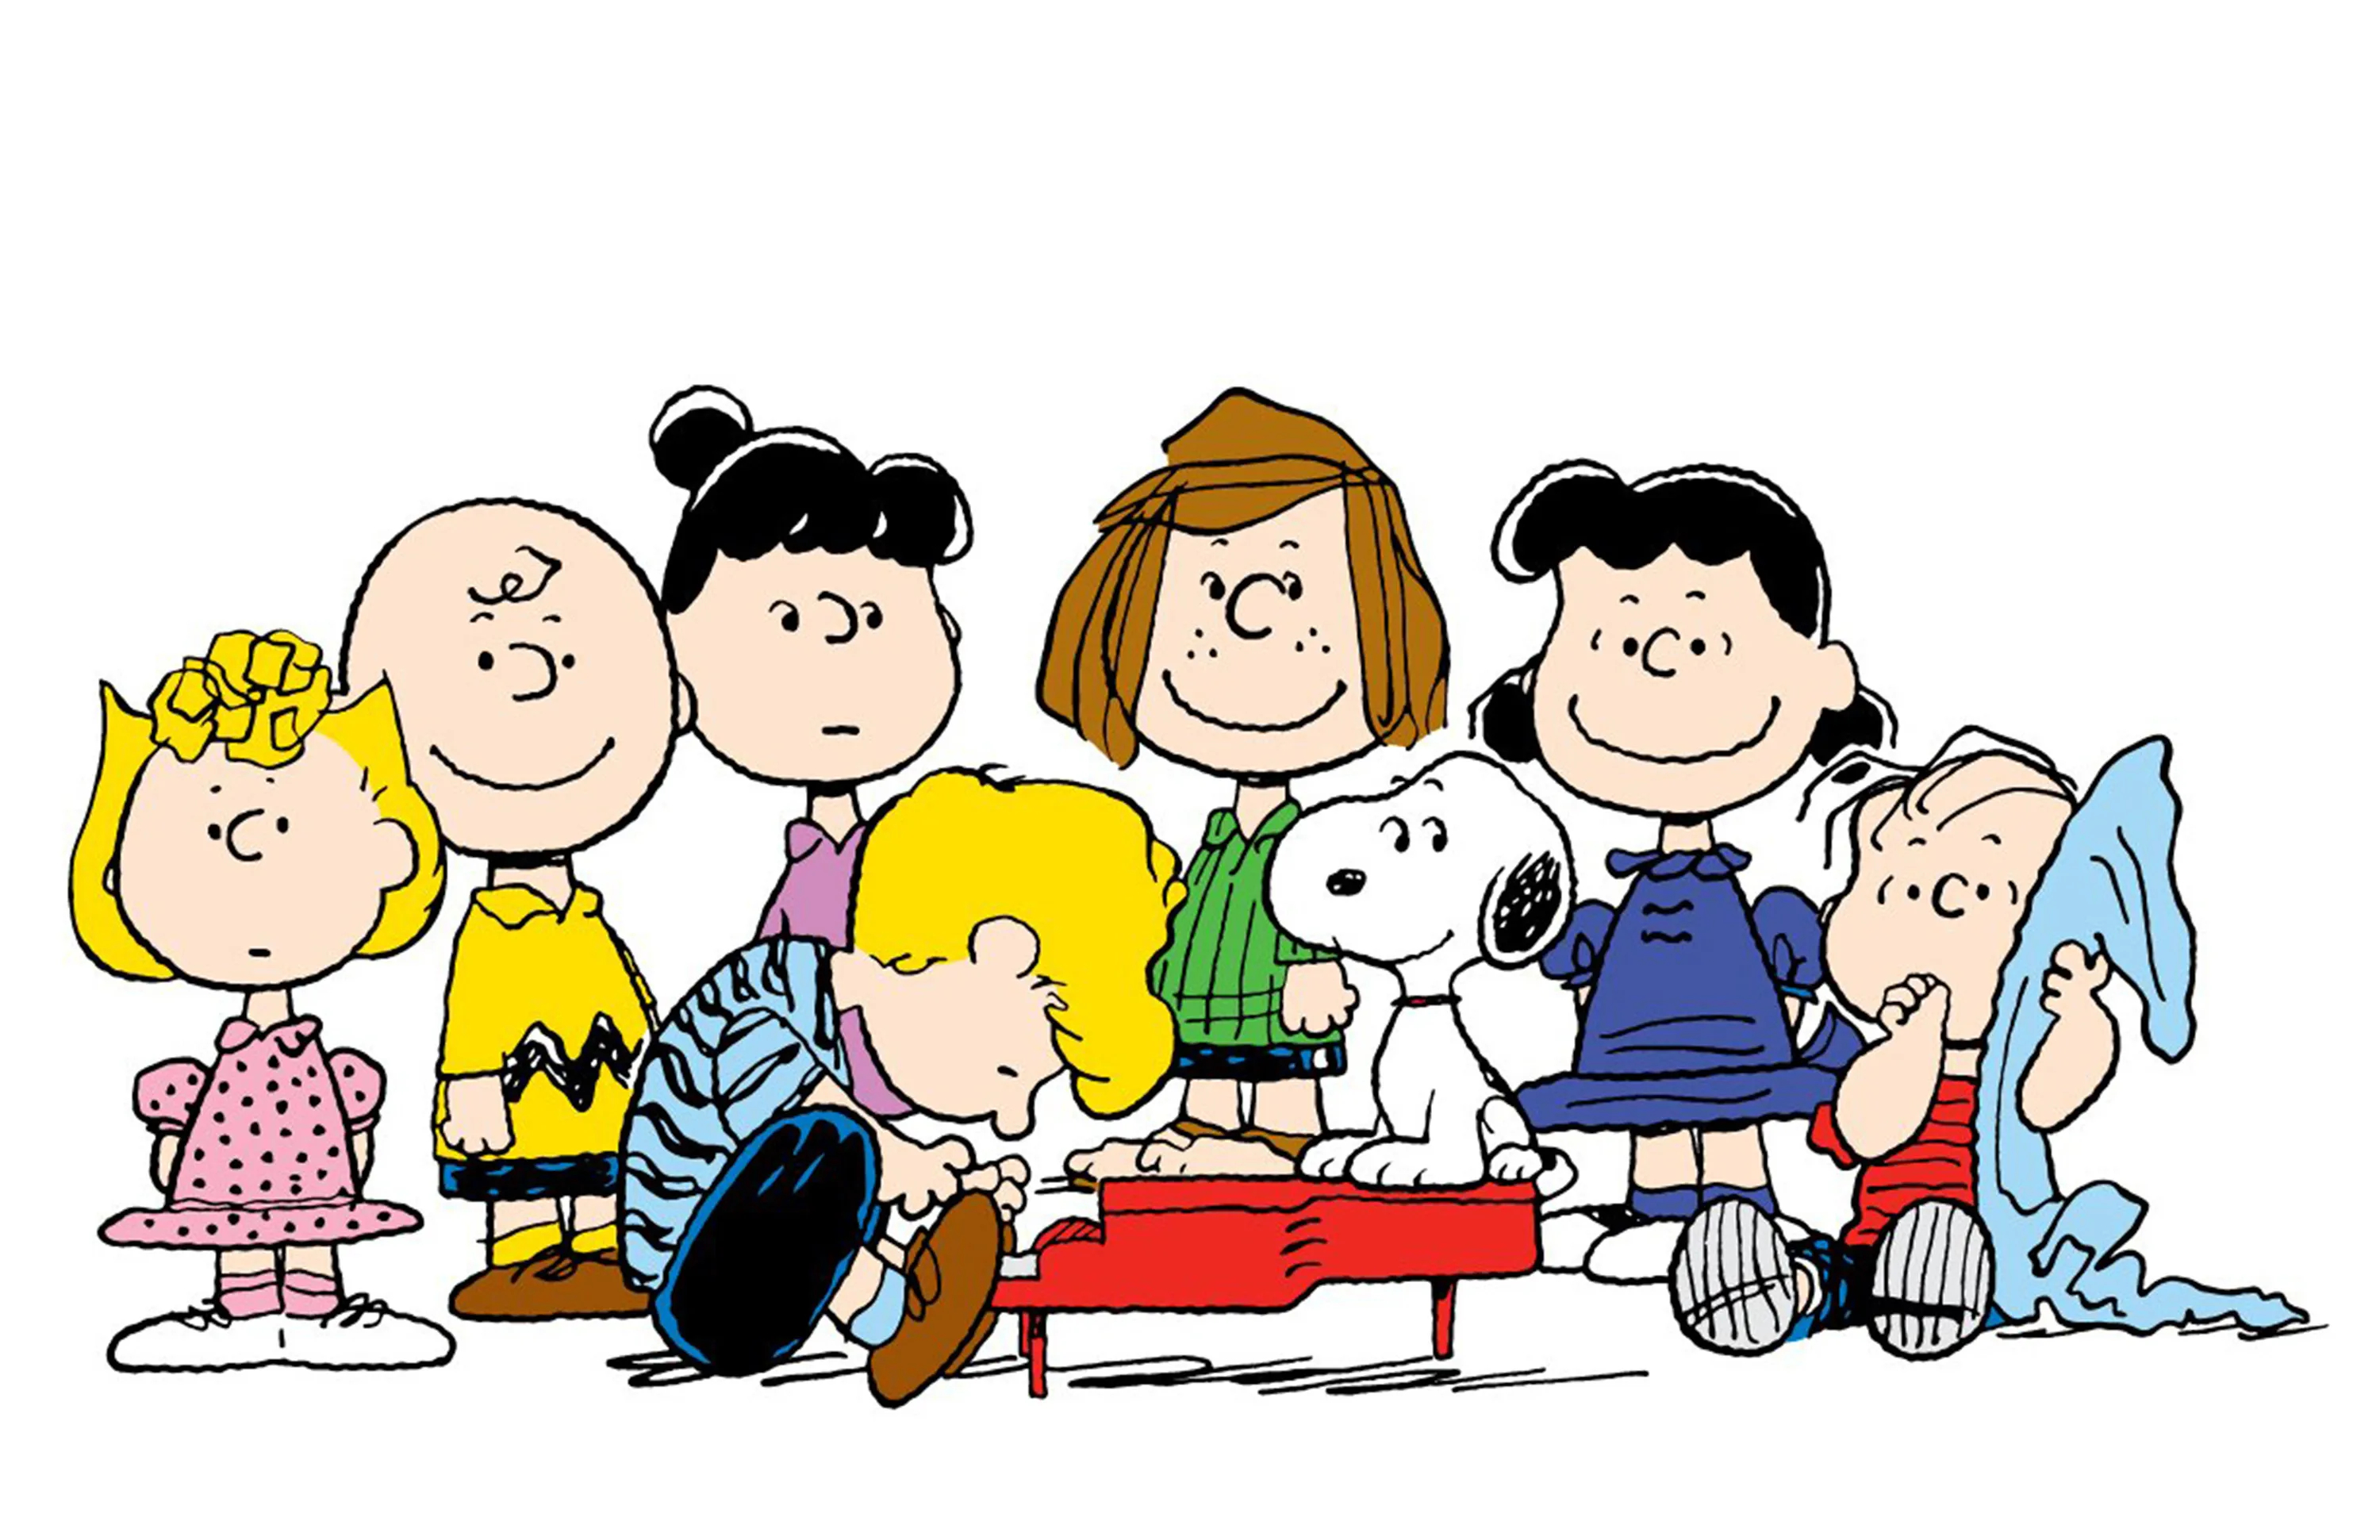 3000x1941 Apple strikes deal to produce new 'Peanuts' content